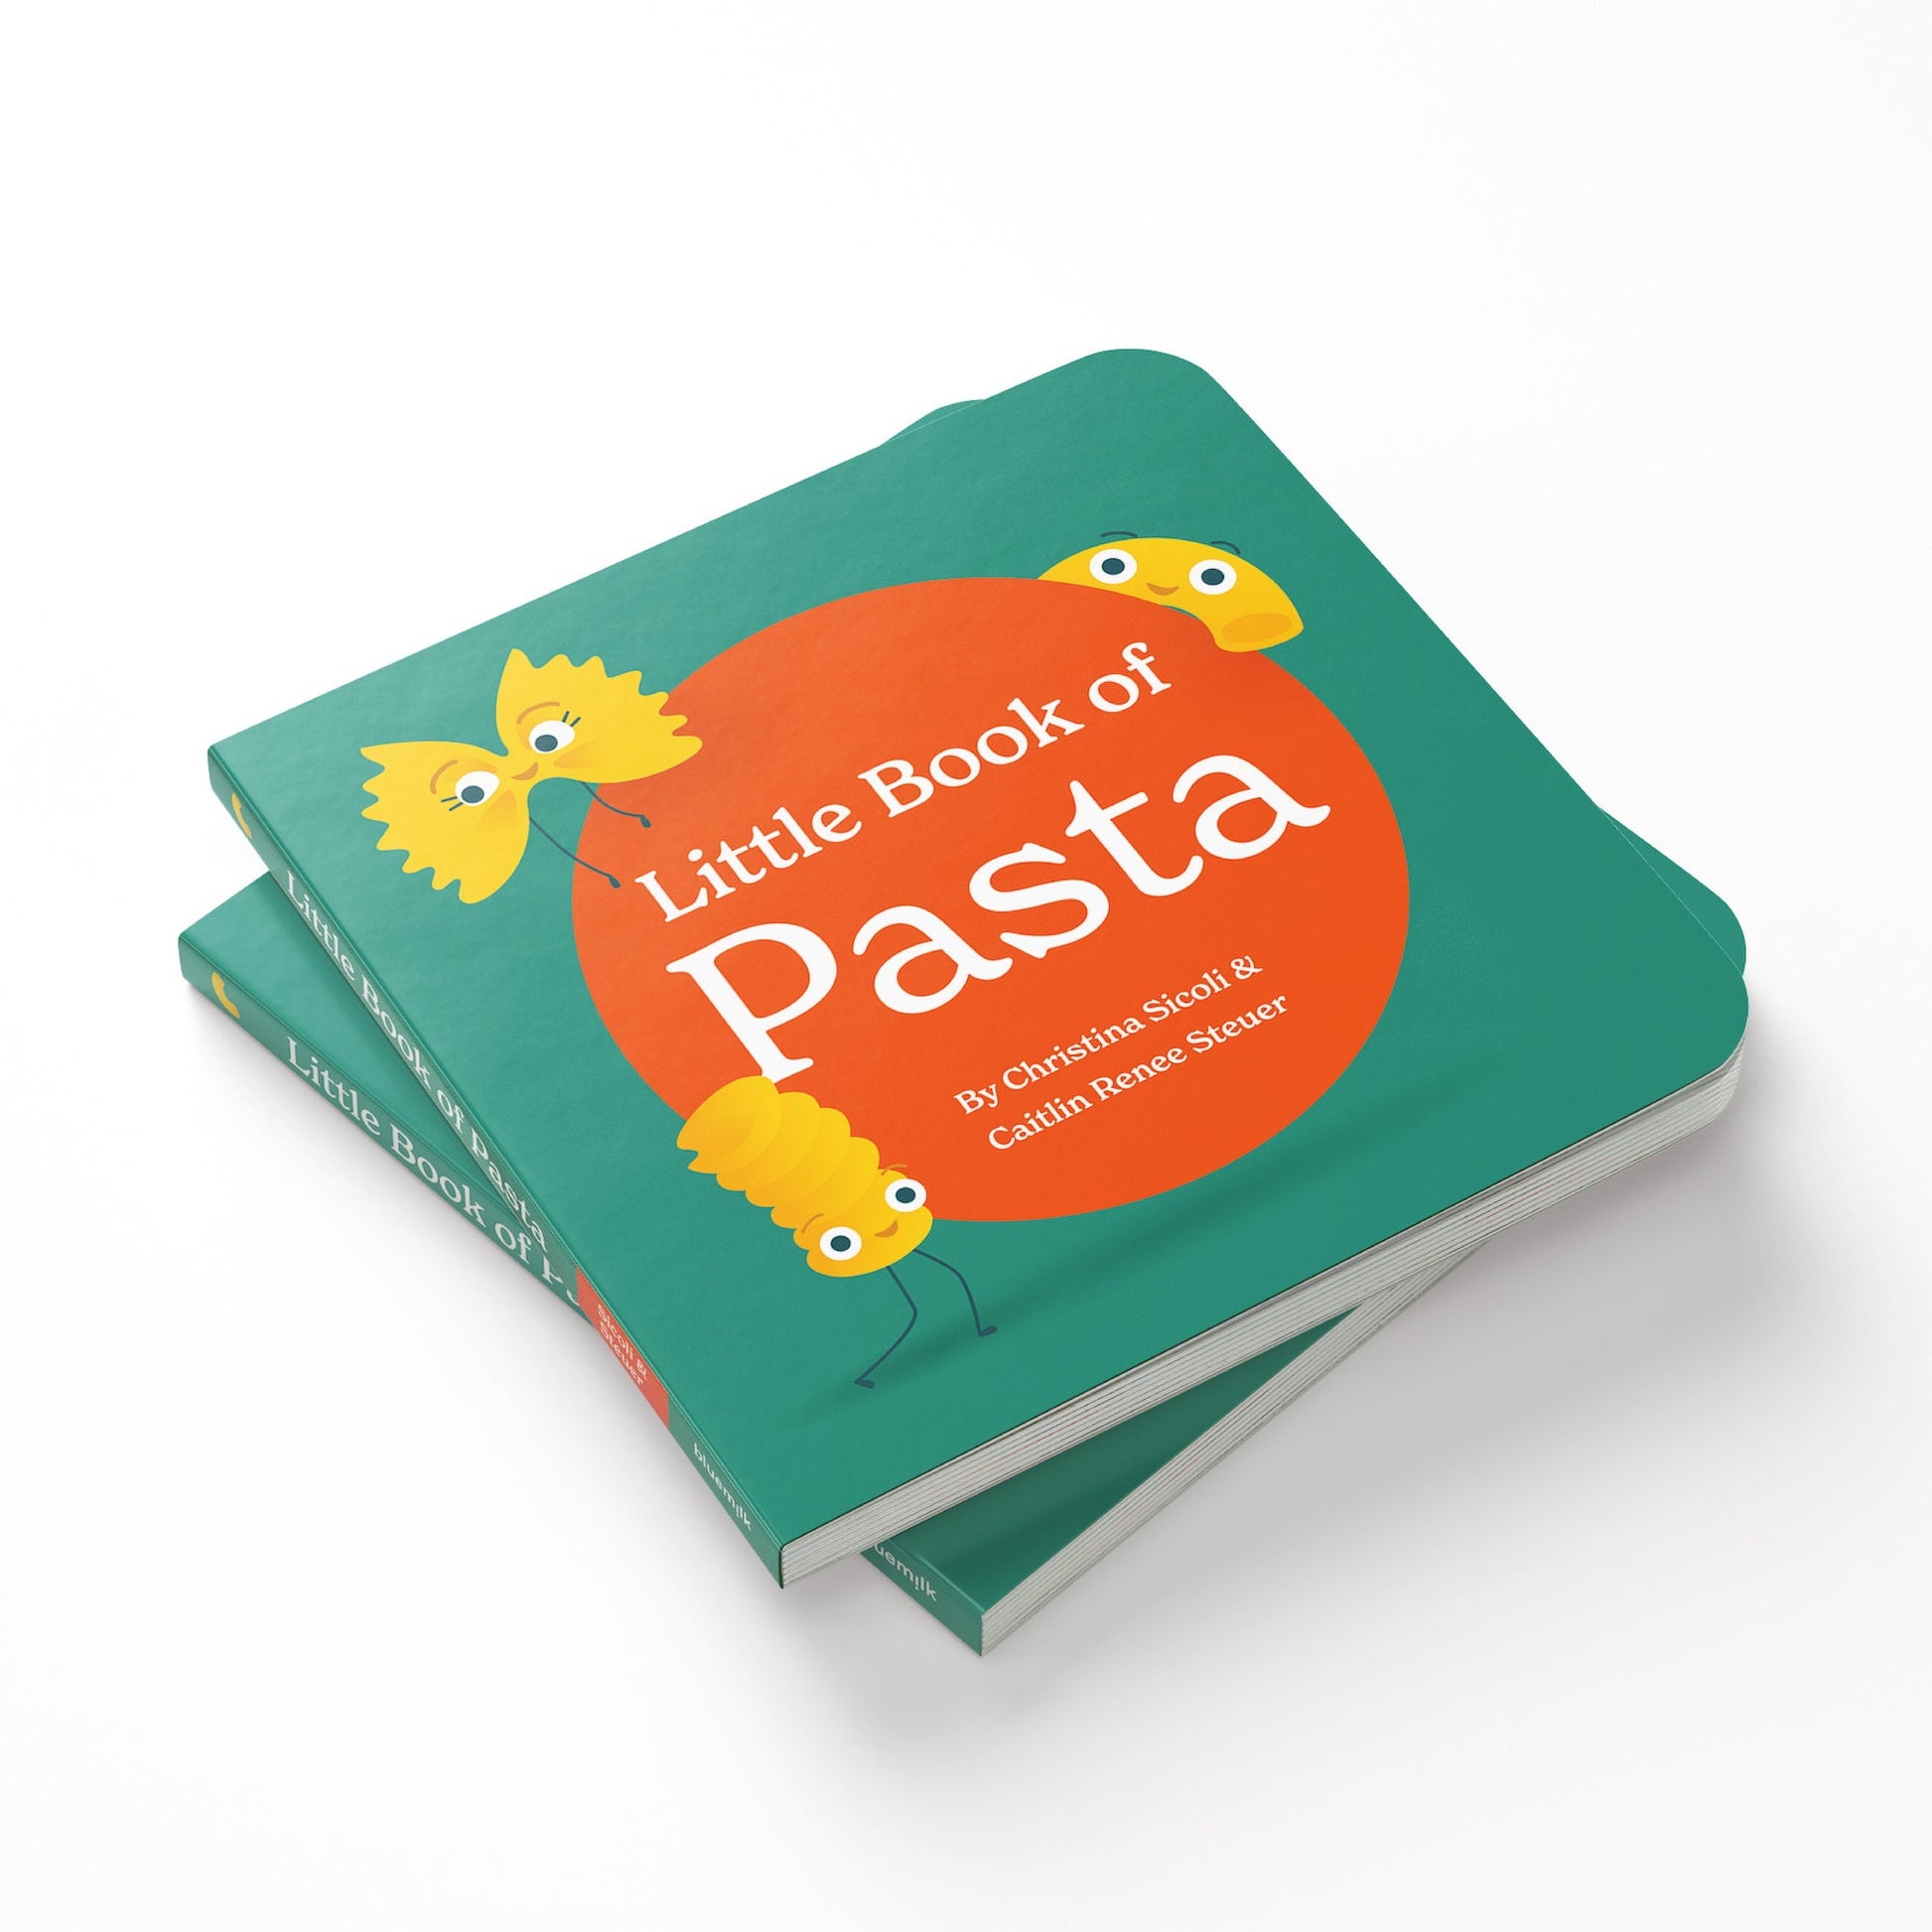 Stack of two children's board books, Little Book of Pasta, a story about Italian pasta shapes and how to pronounce each shape's proper name.